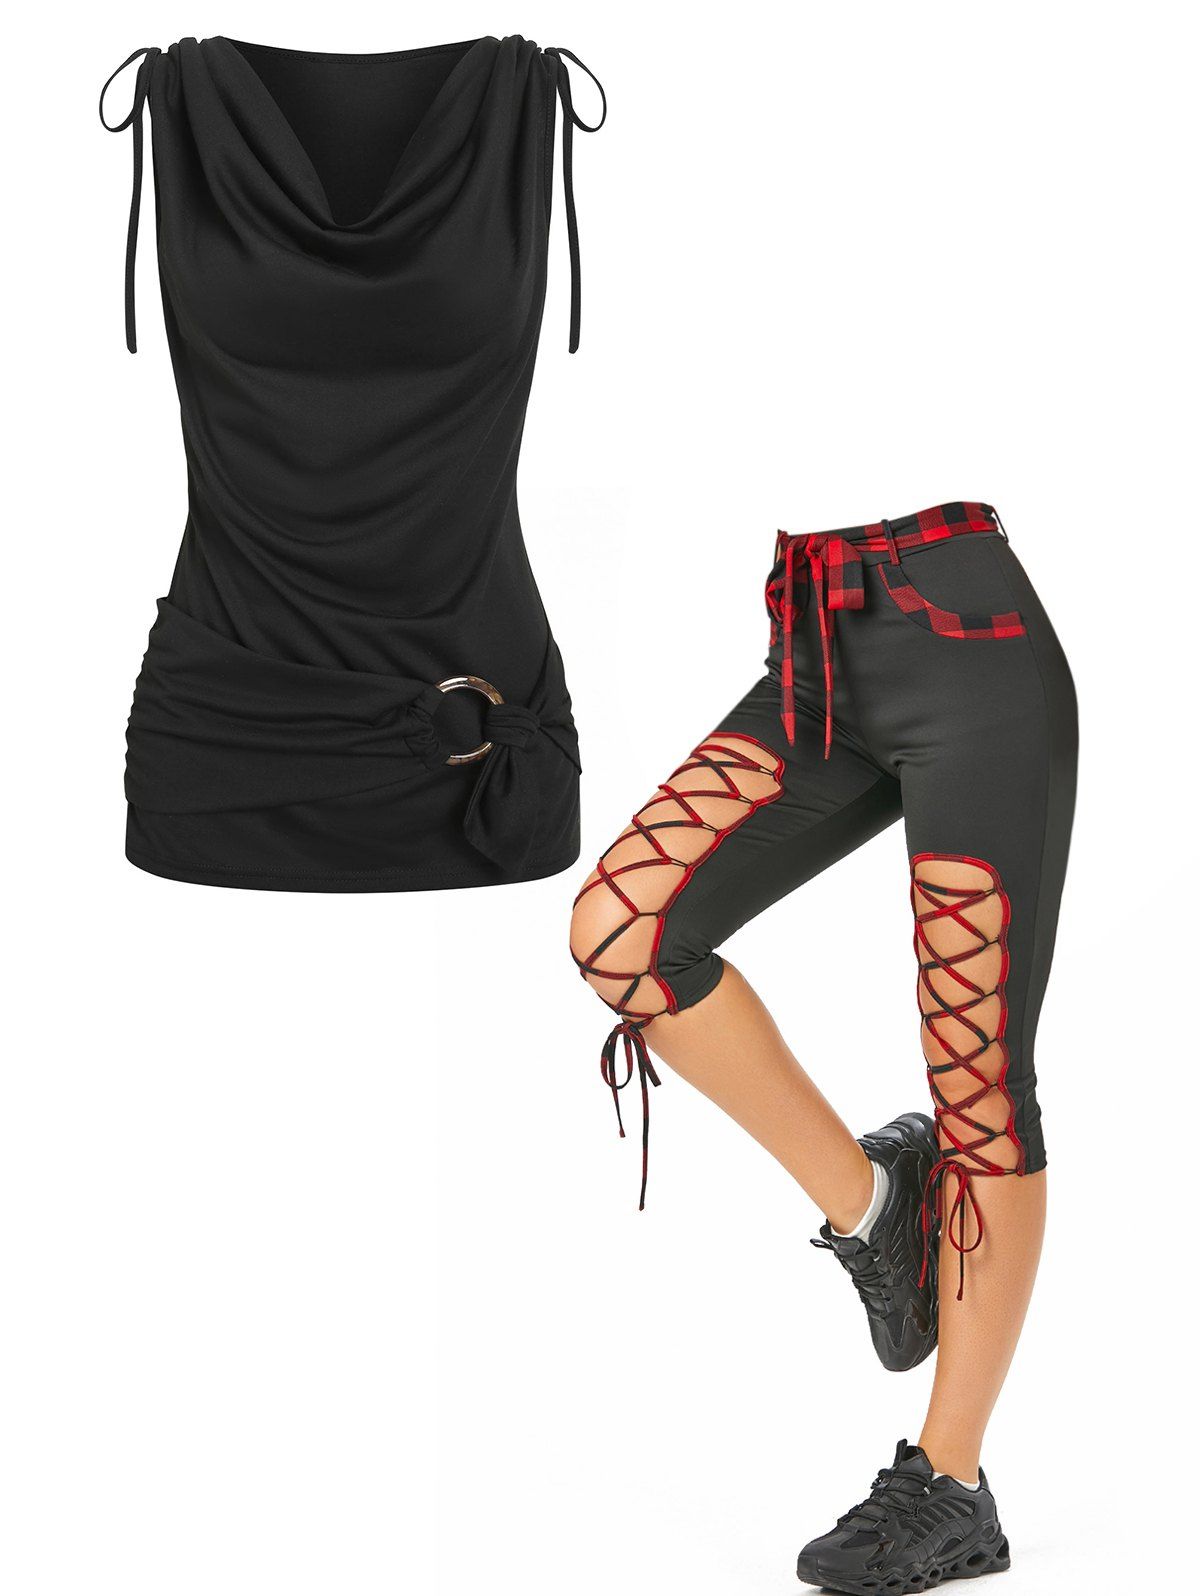 Cowl Neck Cinched Tie O Ring Gothic Tank Top And Plaid Lace Up Capri Leggings Outfit - BLACK S